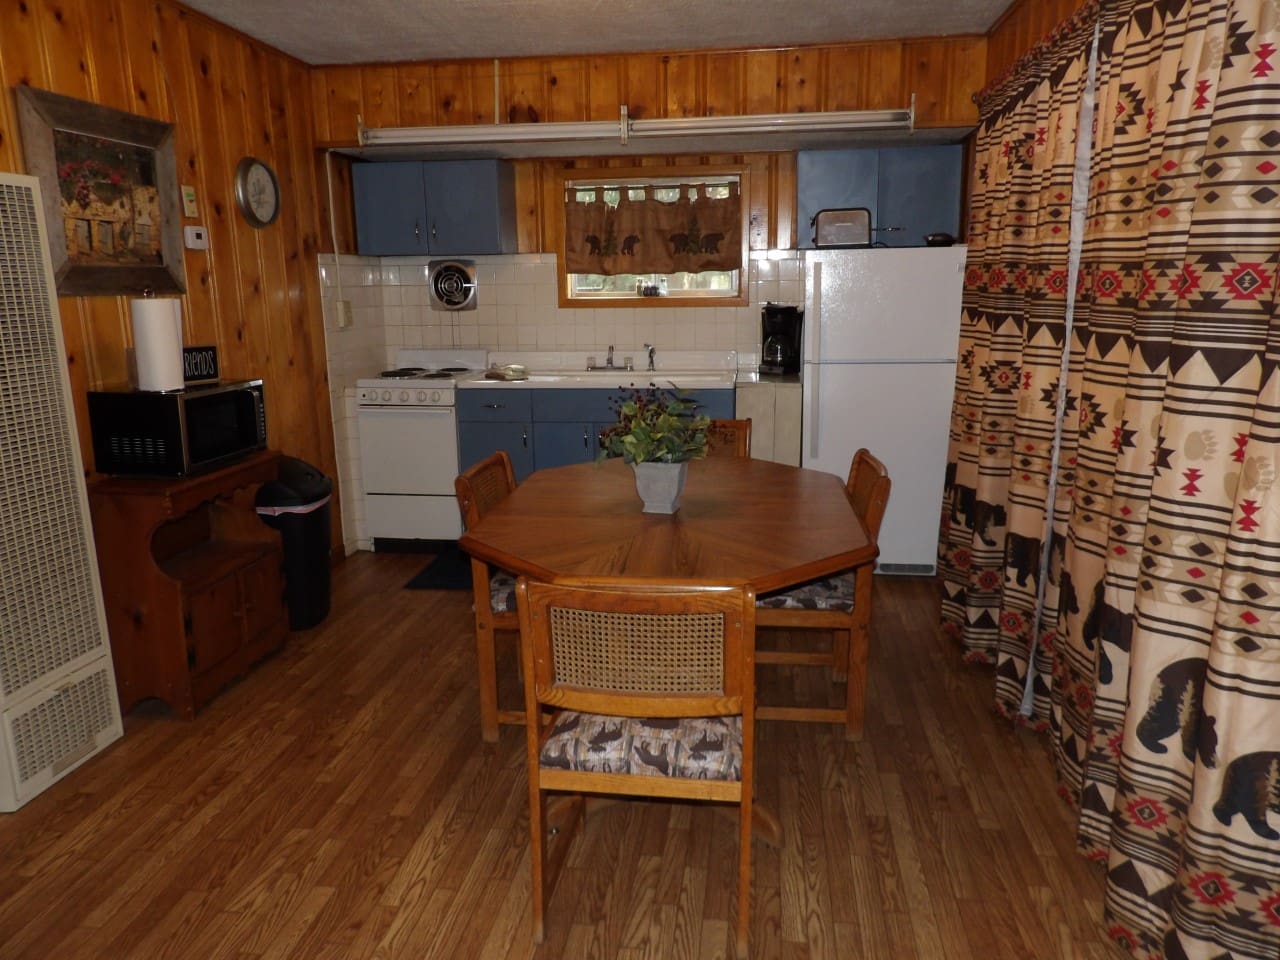 A kitchen with wood floors and wooden cabinets.